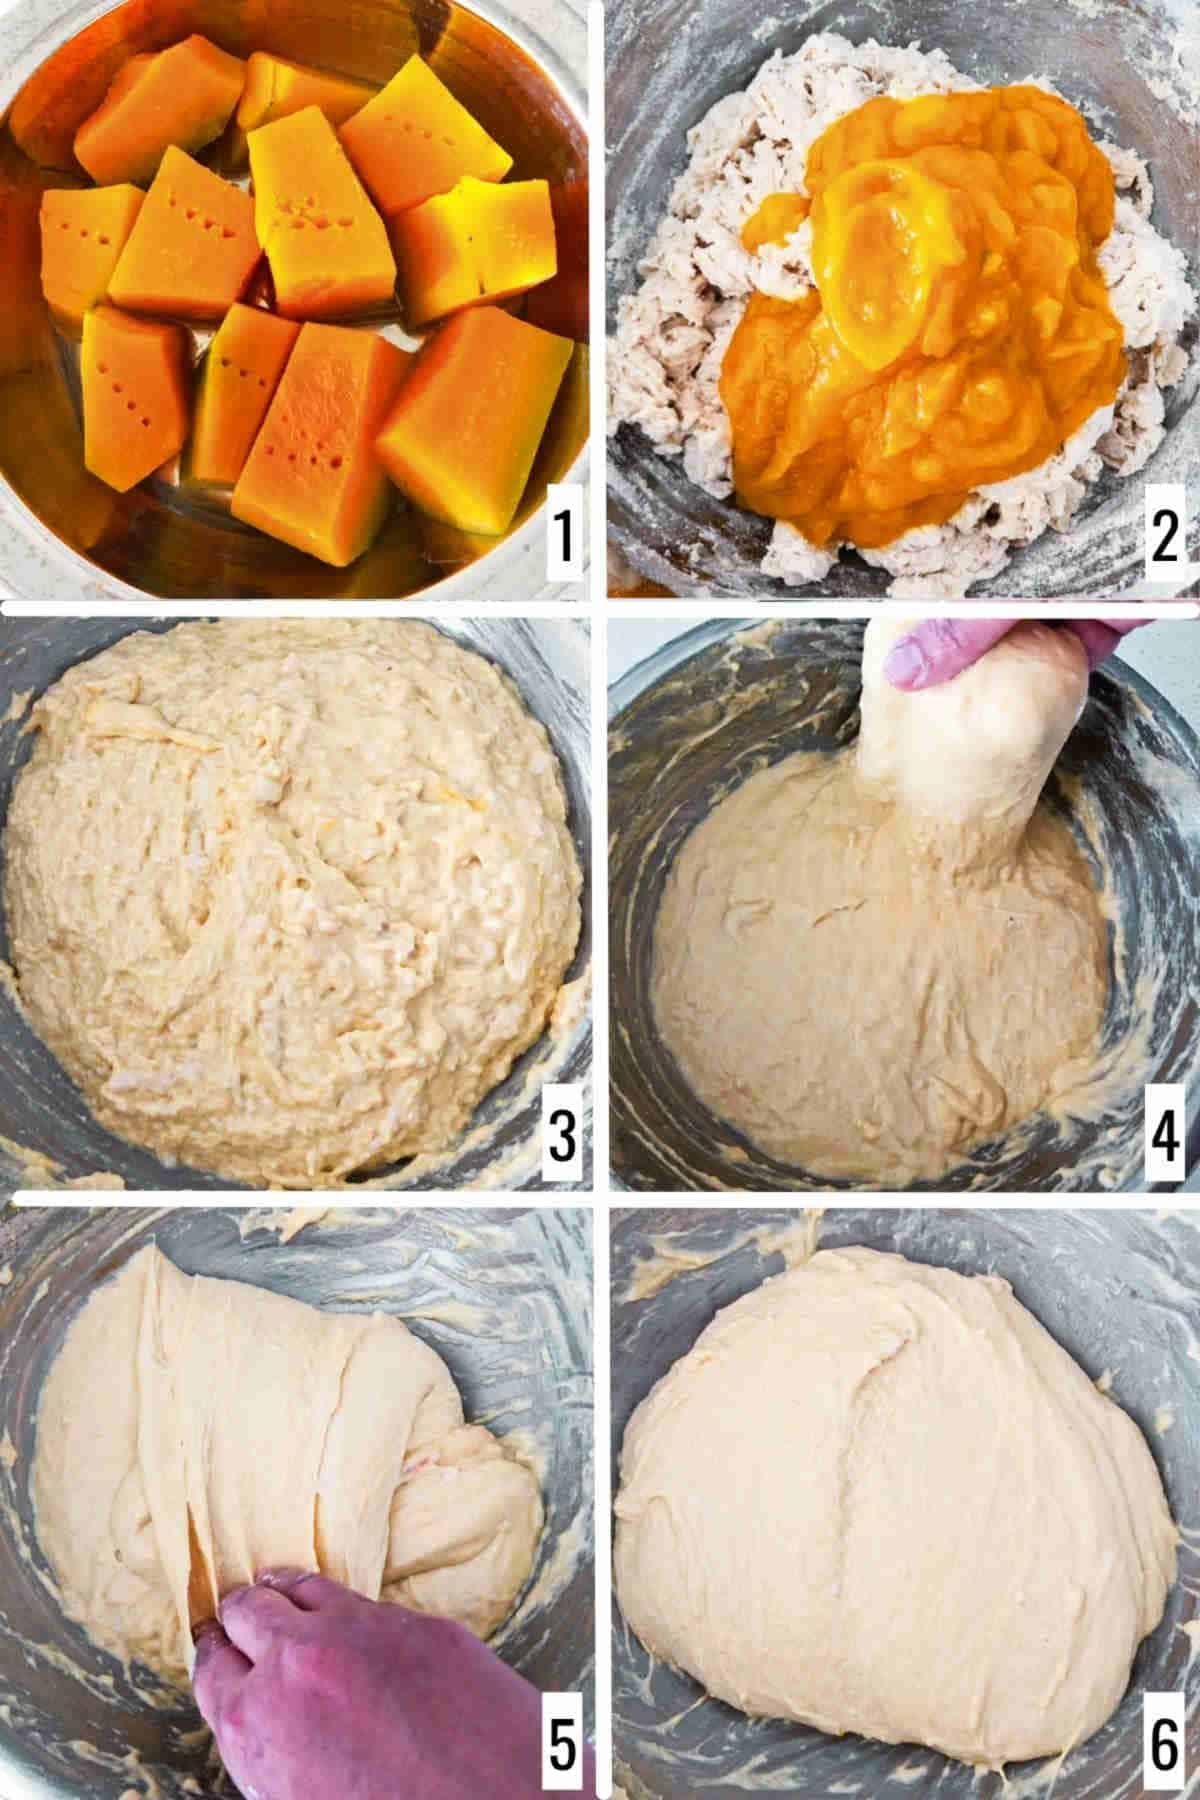 A 6-step collage showing the making of initial dough.